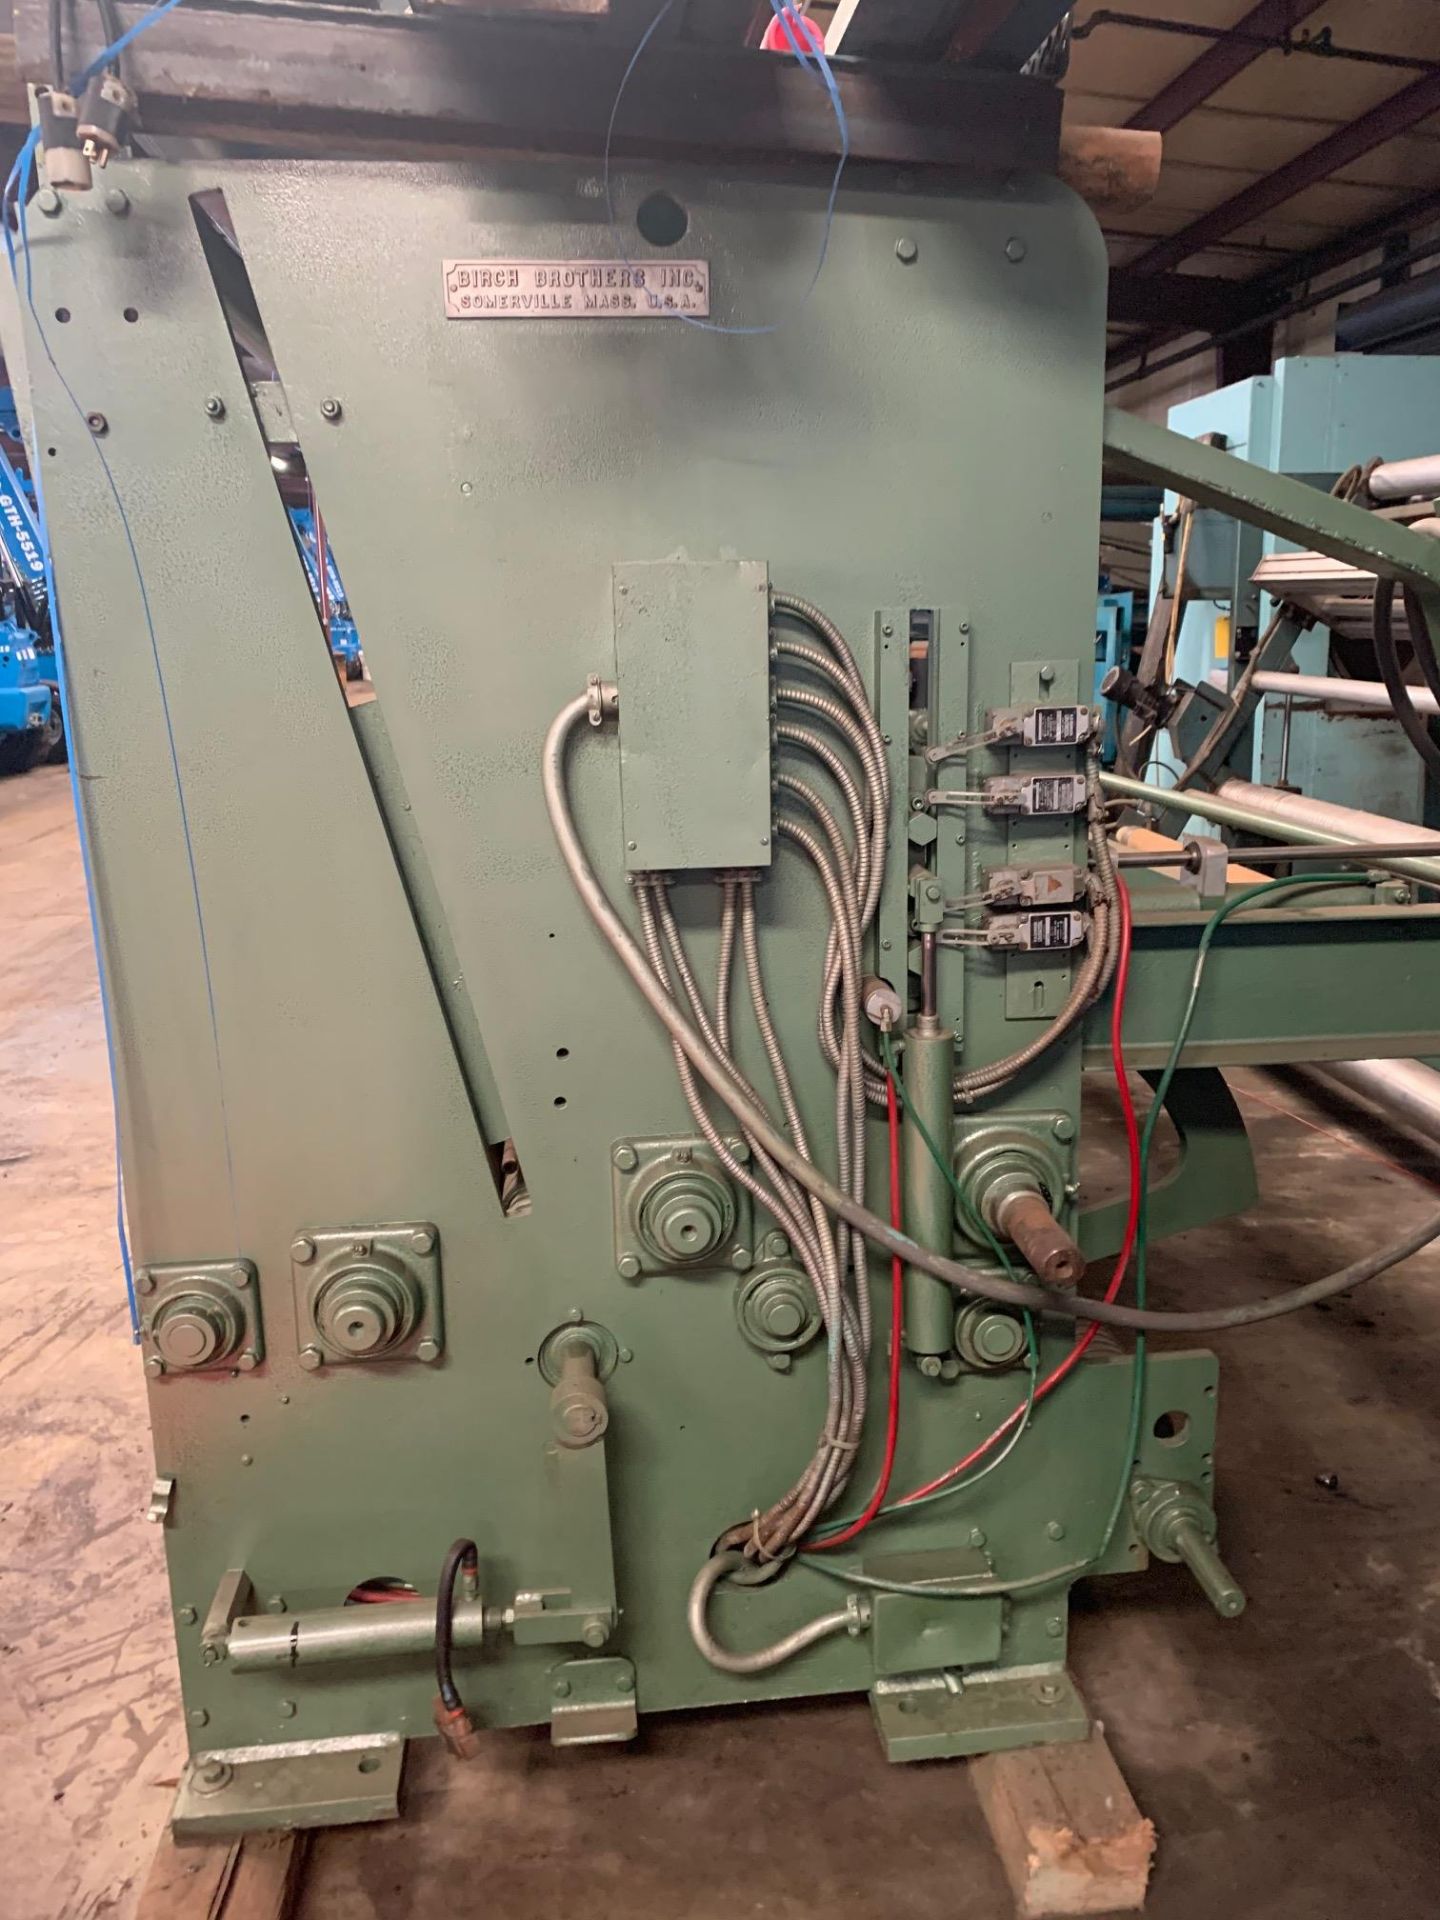 Automatic Continuous Winder, Model# 87760, 48-242, Working Width 138", Good Condition, Rigging Fee $ - Image 6 of 8